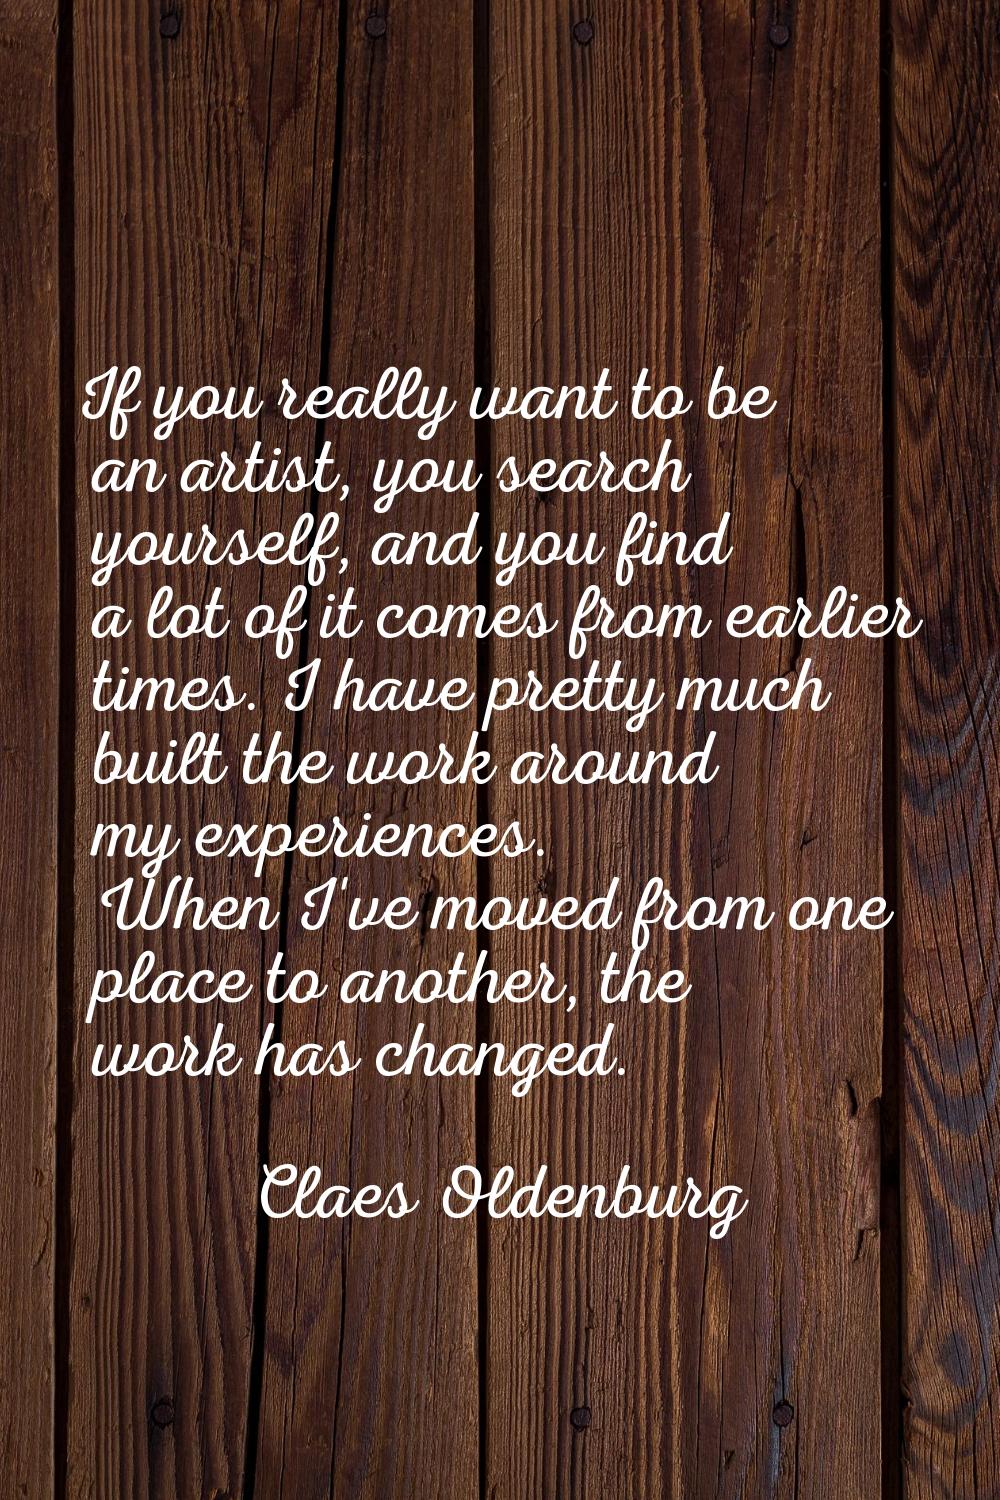 If you really want to be an artist, you search yourself, and you find a lot of it comes from earlie